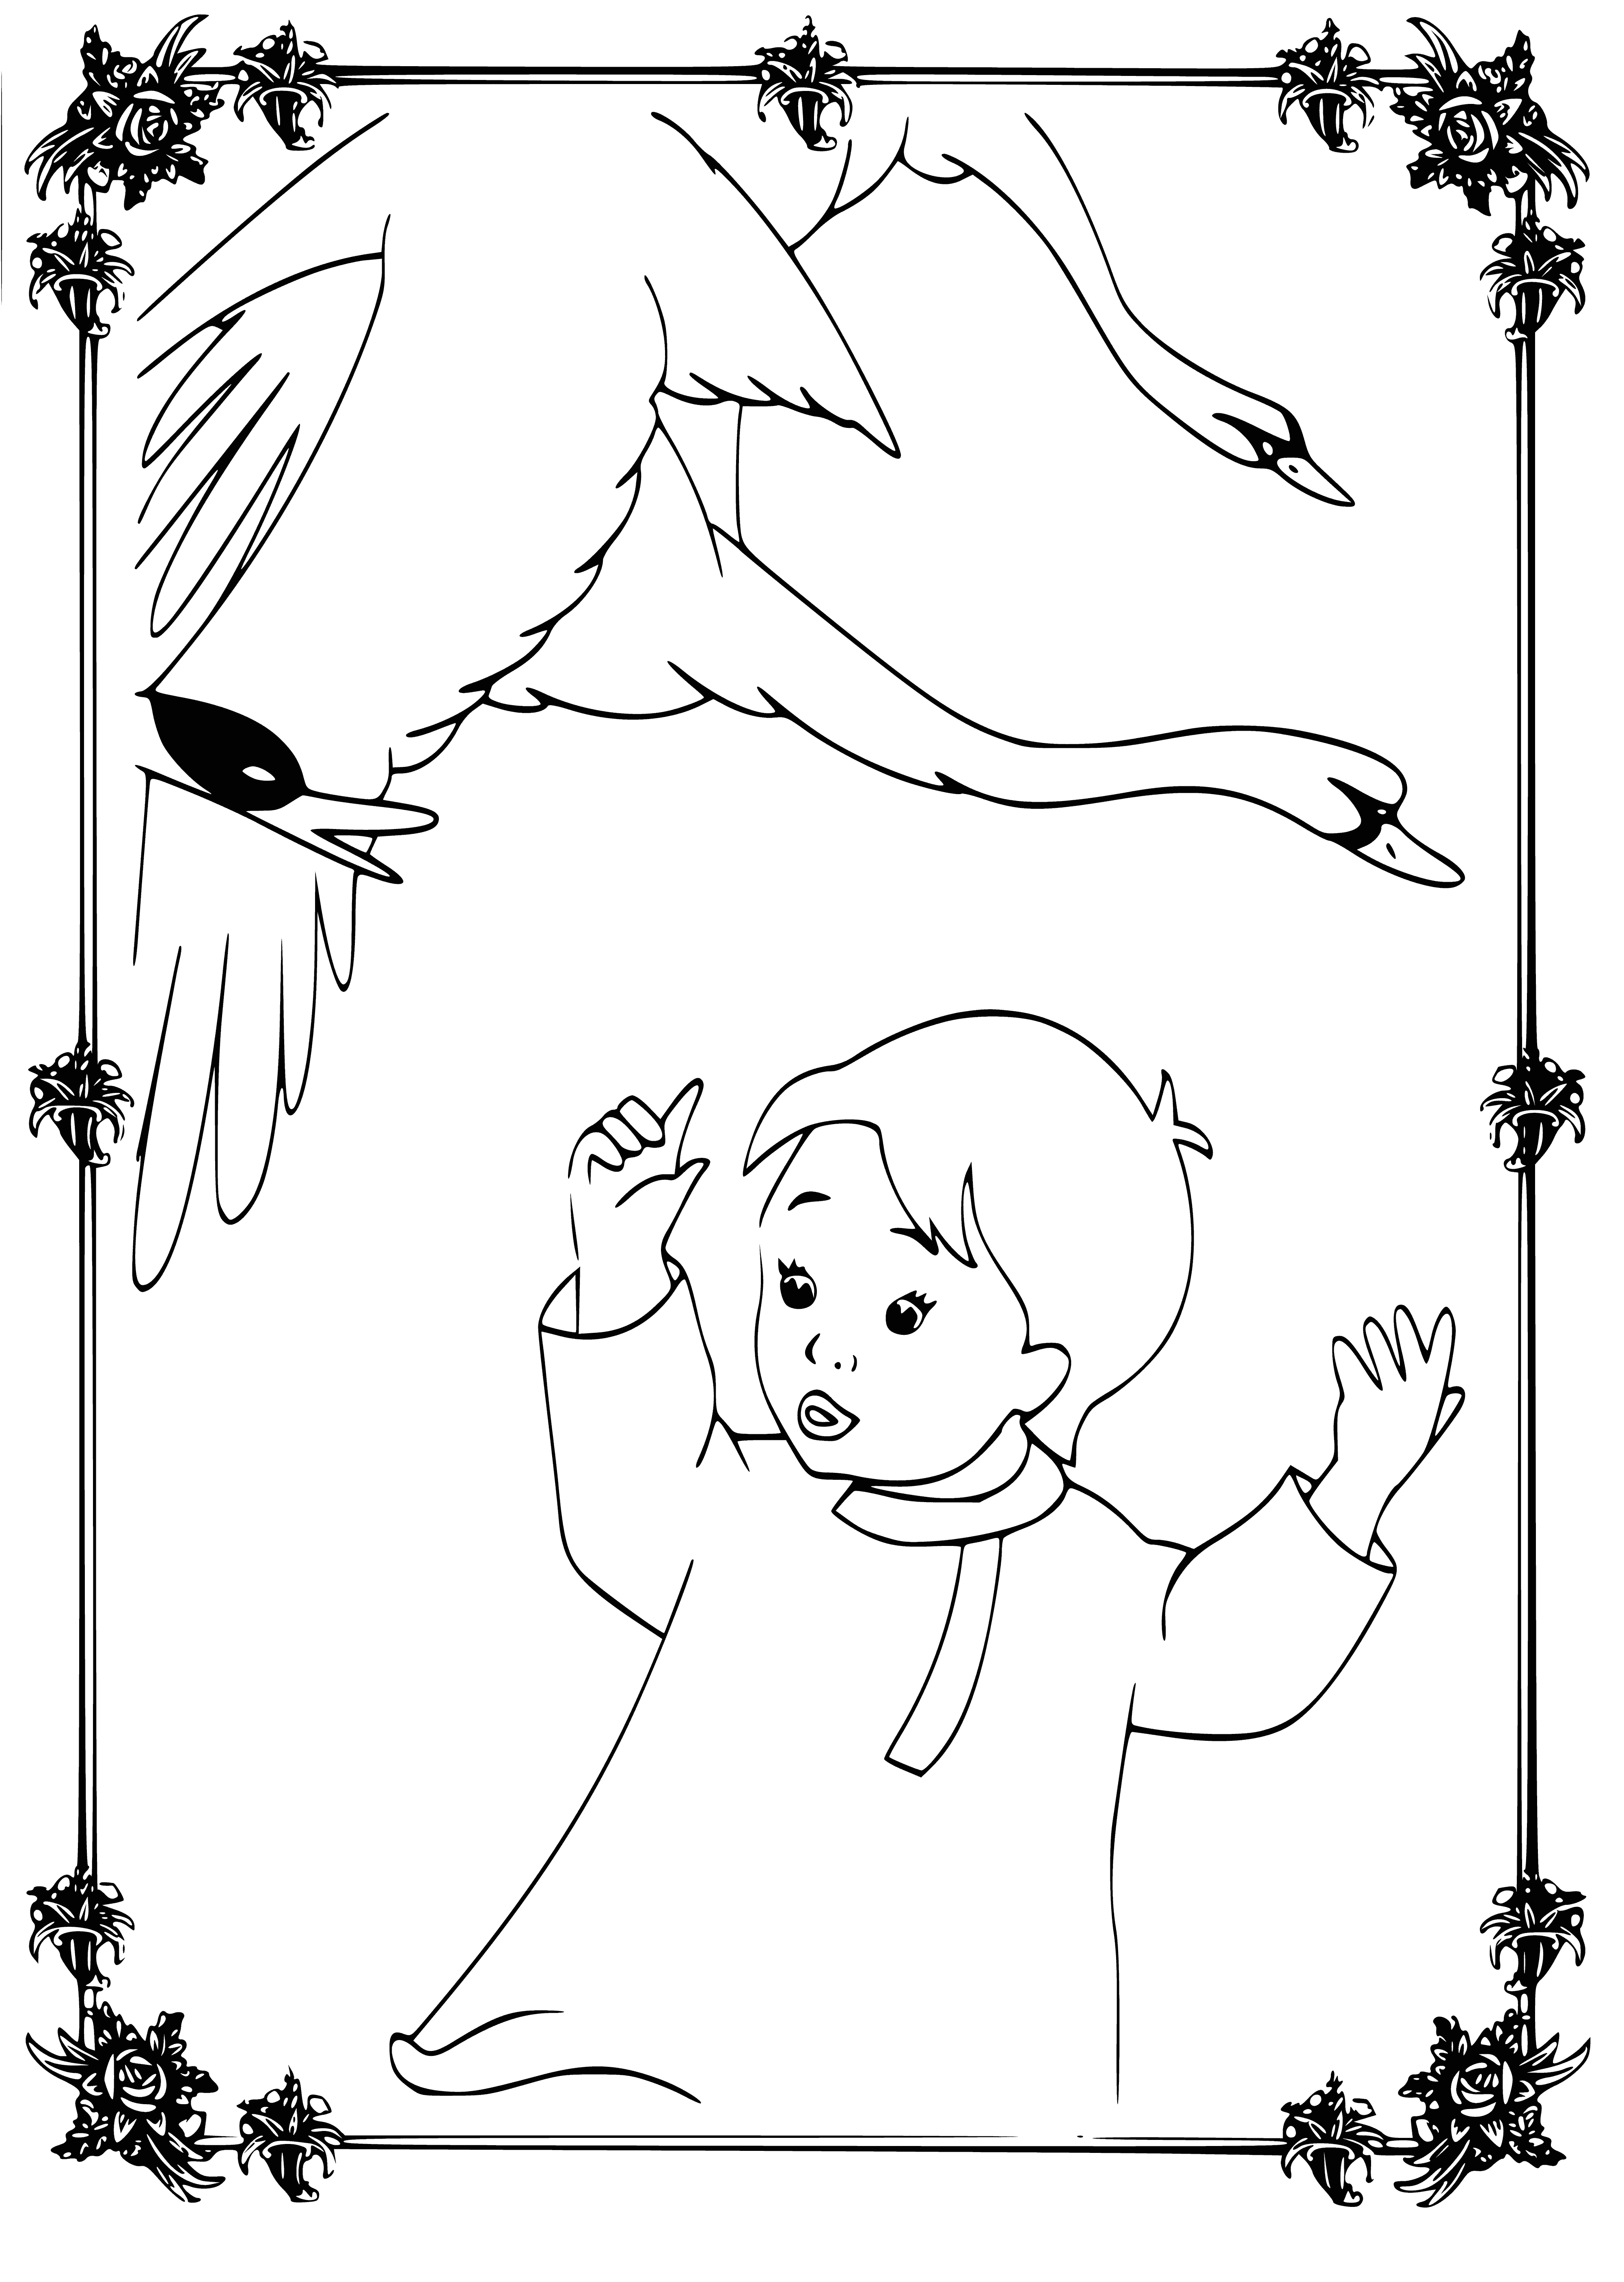 Attack coloring page